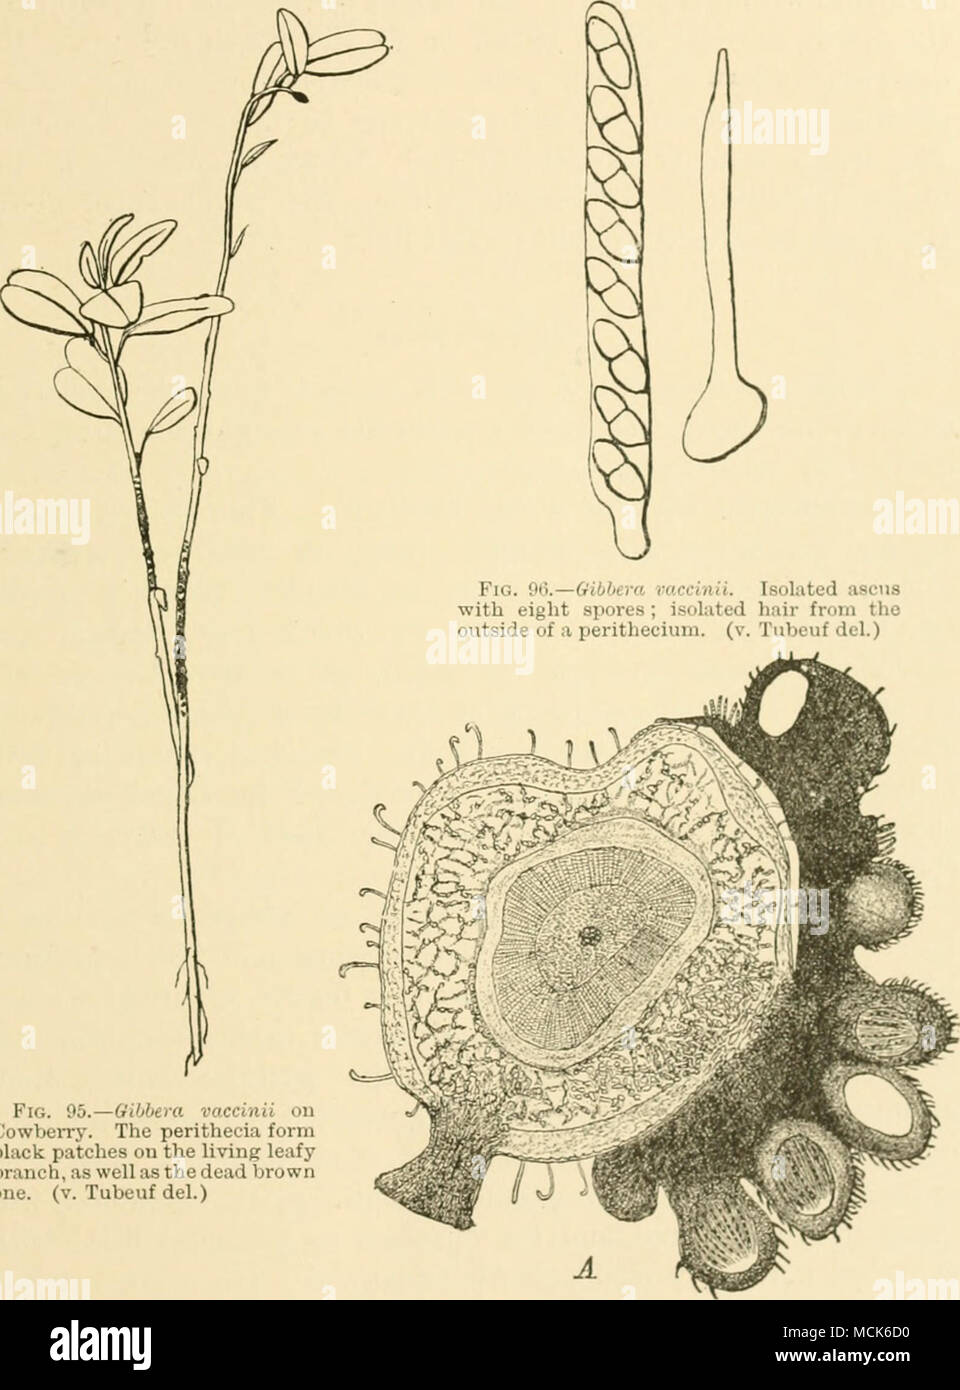 . Fig. 05.—Gibbera Cowberry. The perithecia form black patches on the living leafy branch, as well as the dead brown one. (v. Tubeuf del.) Fig. 07.—6ibbera vaccinii. Cross-section of Cowberry showing a patch of perithecia in section ; the hairy perithecia contain paraphvses and asci with spores ; a niyccliiun penn&amp;ites the cortical tissue of the host. Short hooked hairs cover the epidermis of the stem. (v. Tubeuf del.) spherical perithecia, which are coated by short, acute, unicellular, black hairs (Fig. 97). The perithecia contain paraphvses and Stock Photo